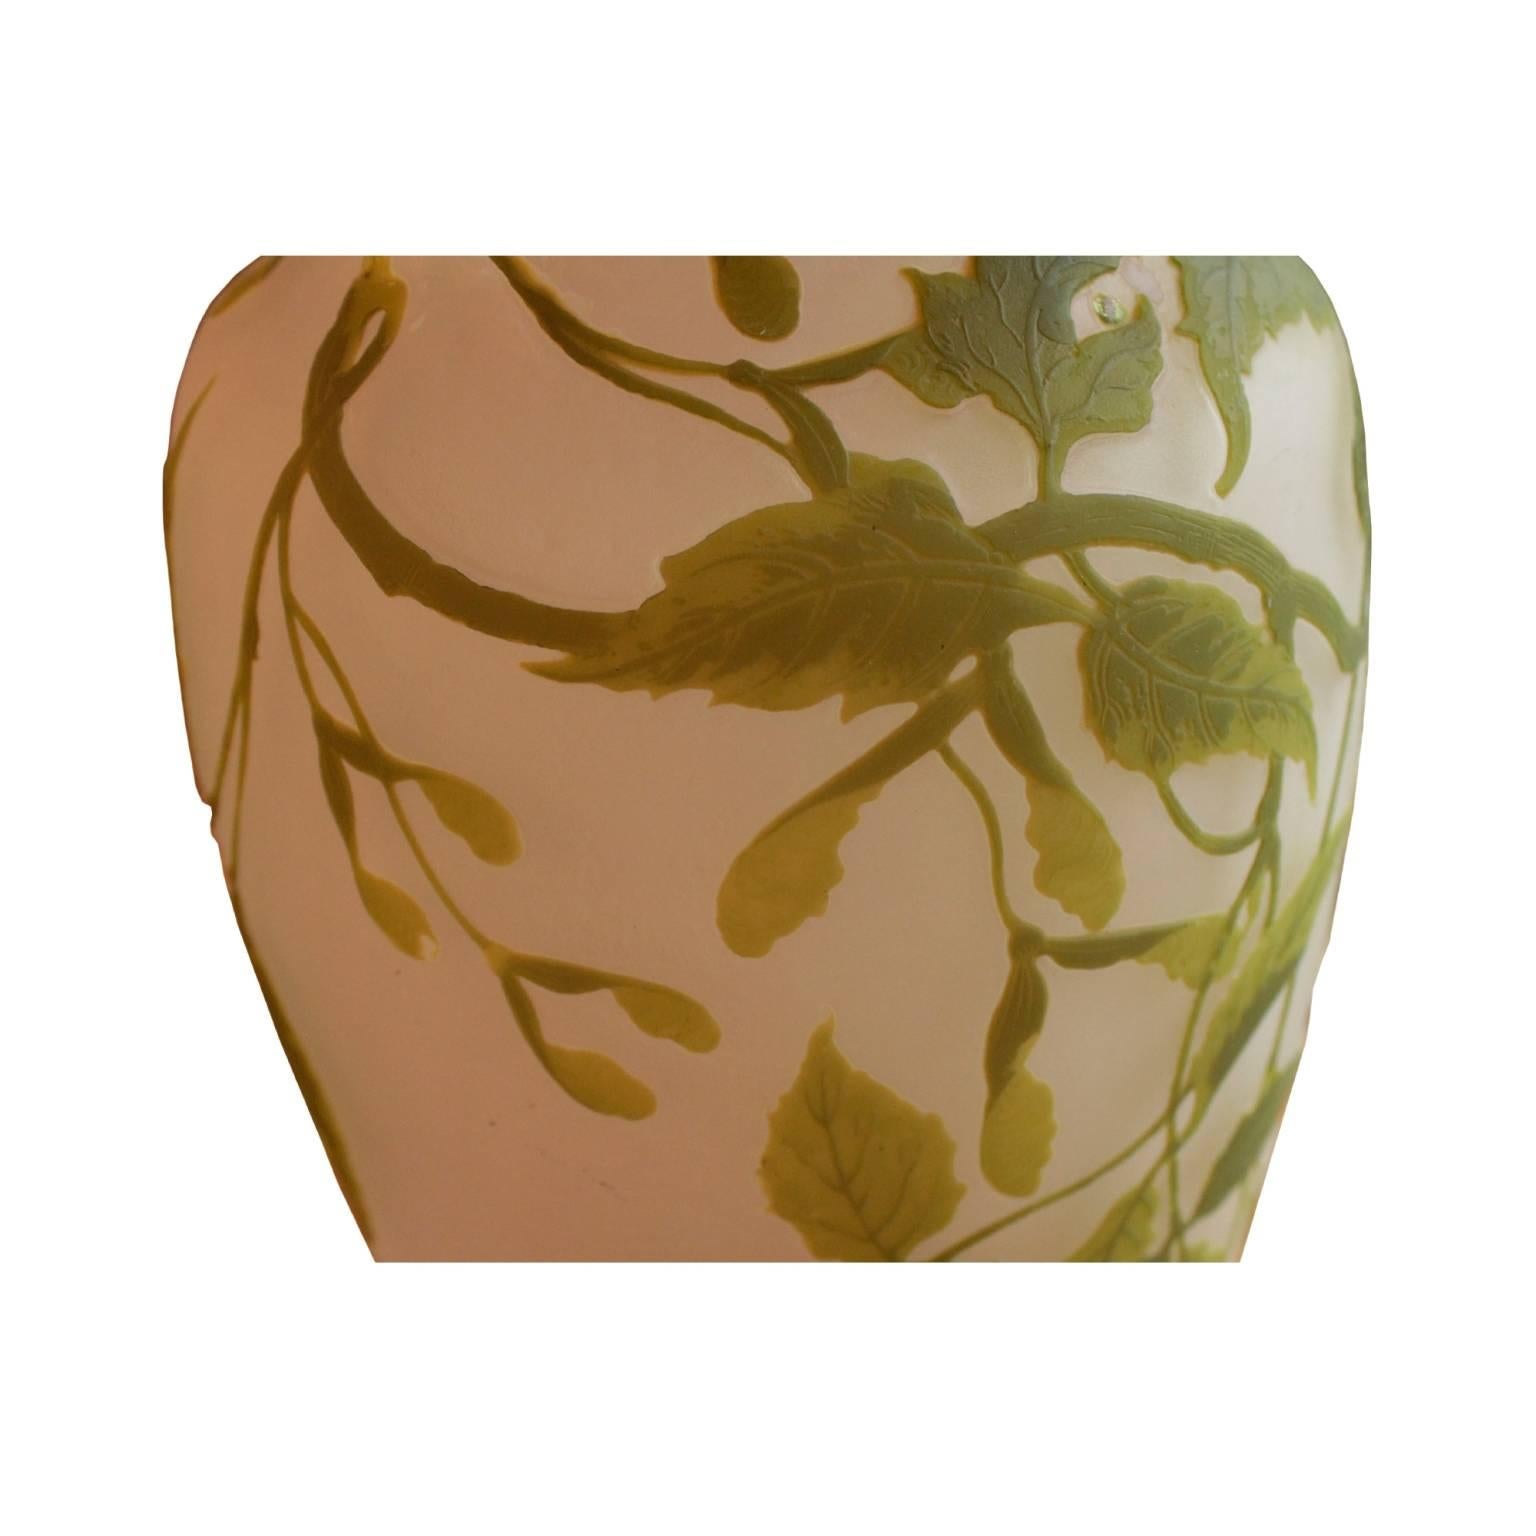 Oversized French Art Nouveau Cameo Vase by Galle In Excellent Condition For Sale In Hudson, NY